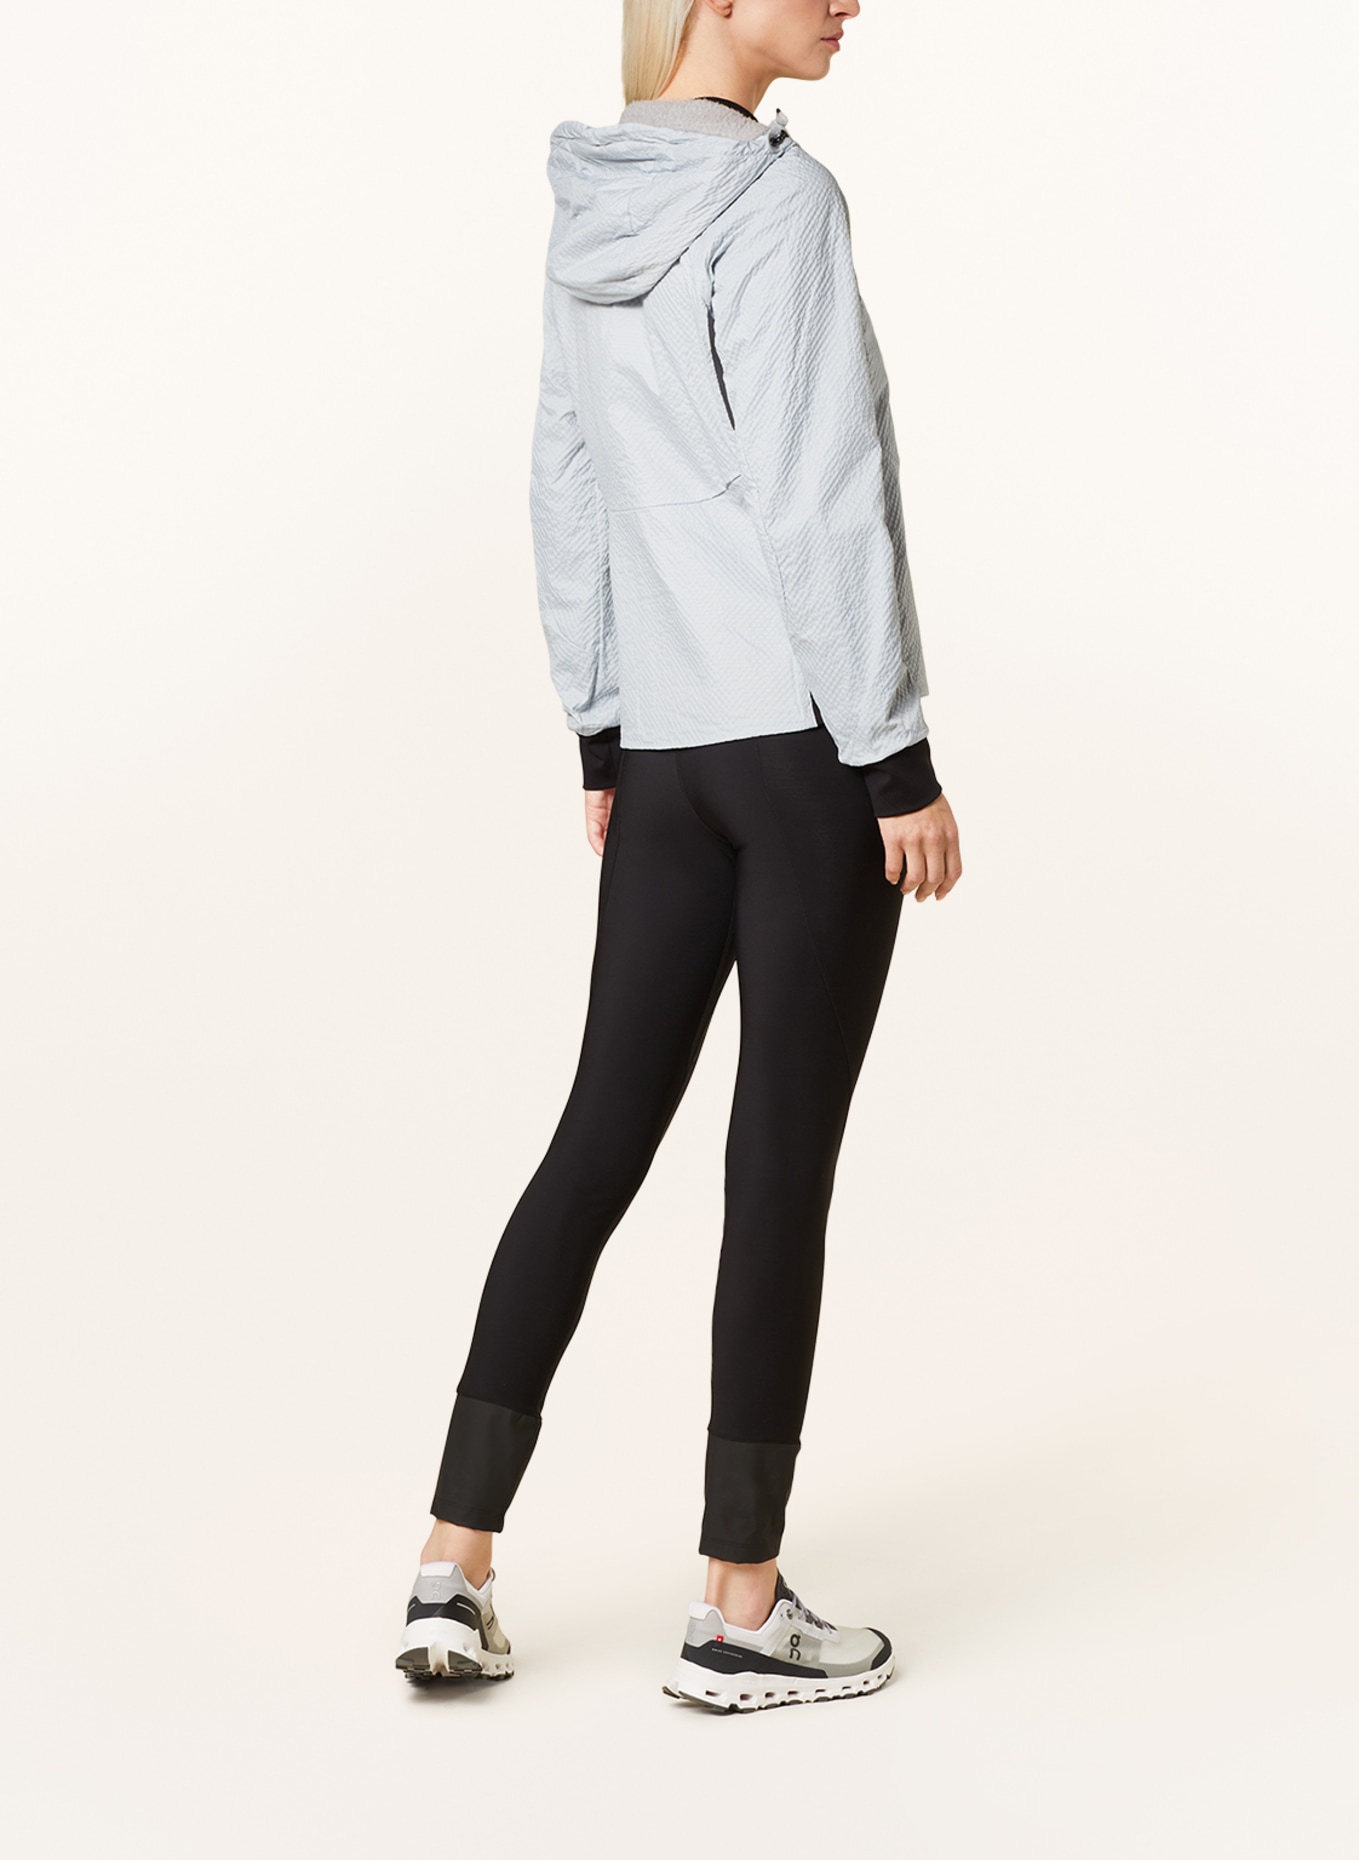 LaMunt Mid-layer jacket ALESSIA, Color: LIGHT GRAY (Image 3)